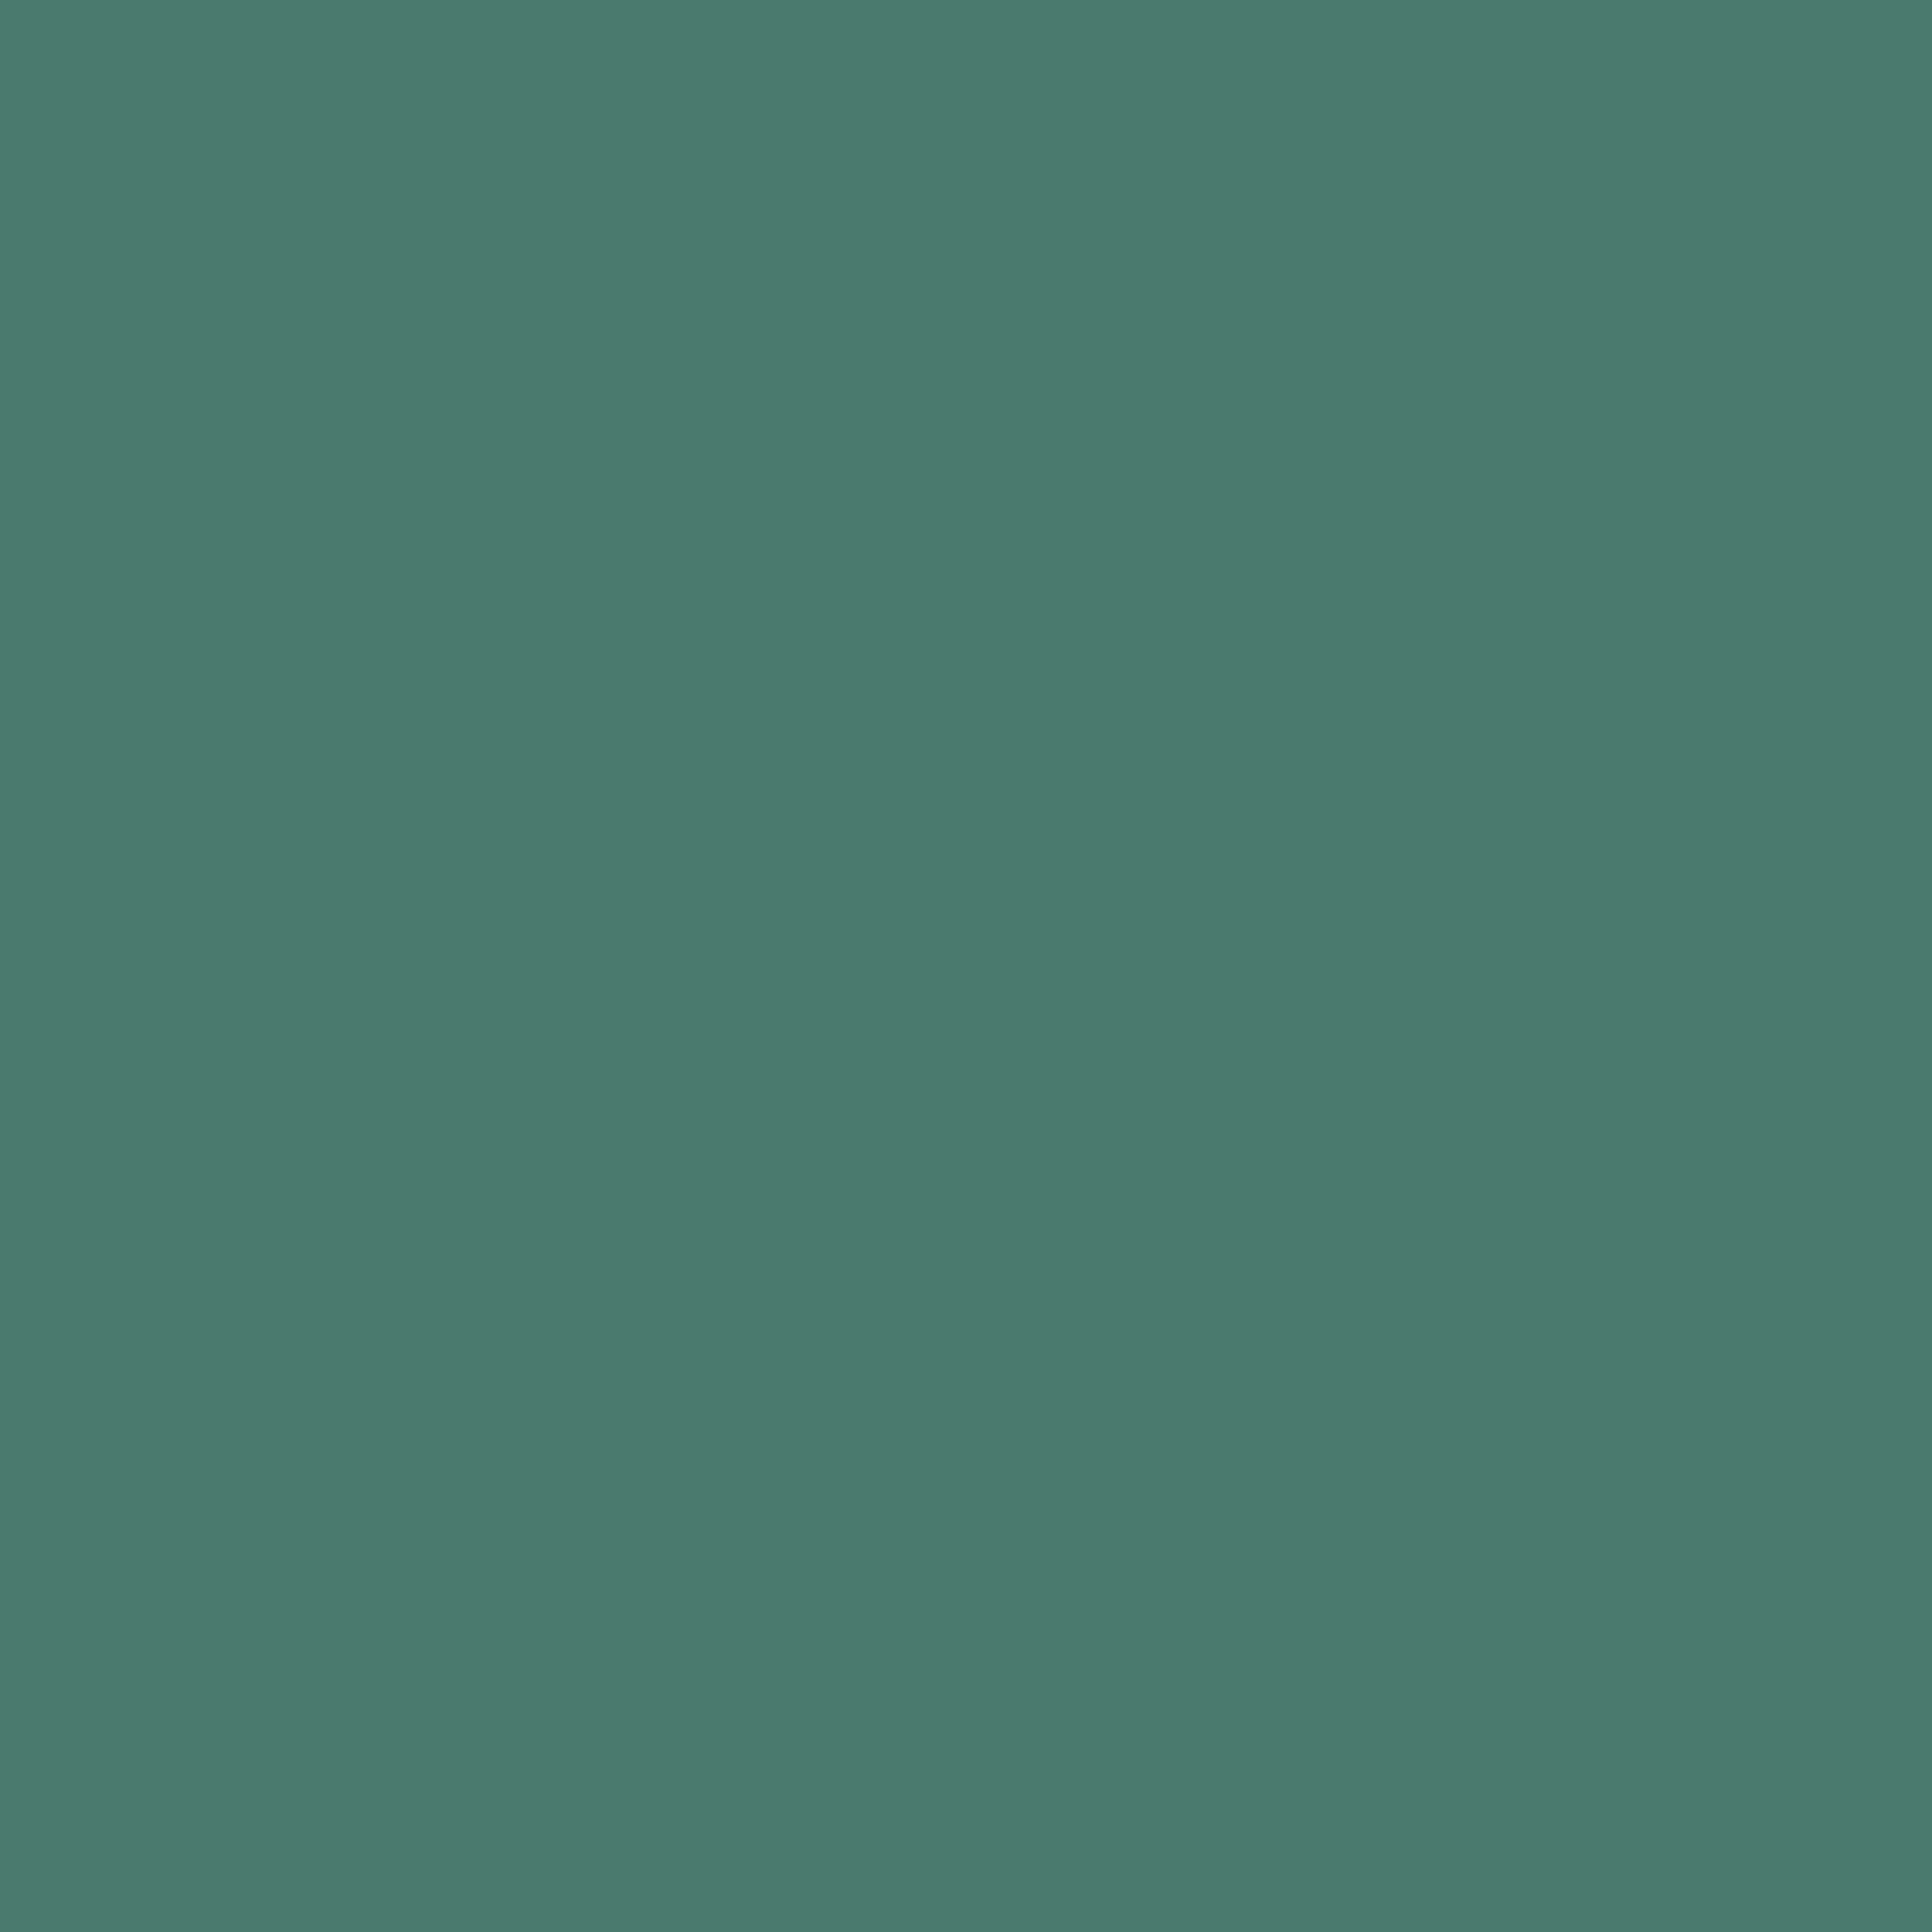 2732x2732 Hookers Green Solid Color Background